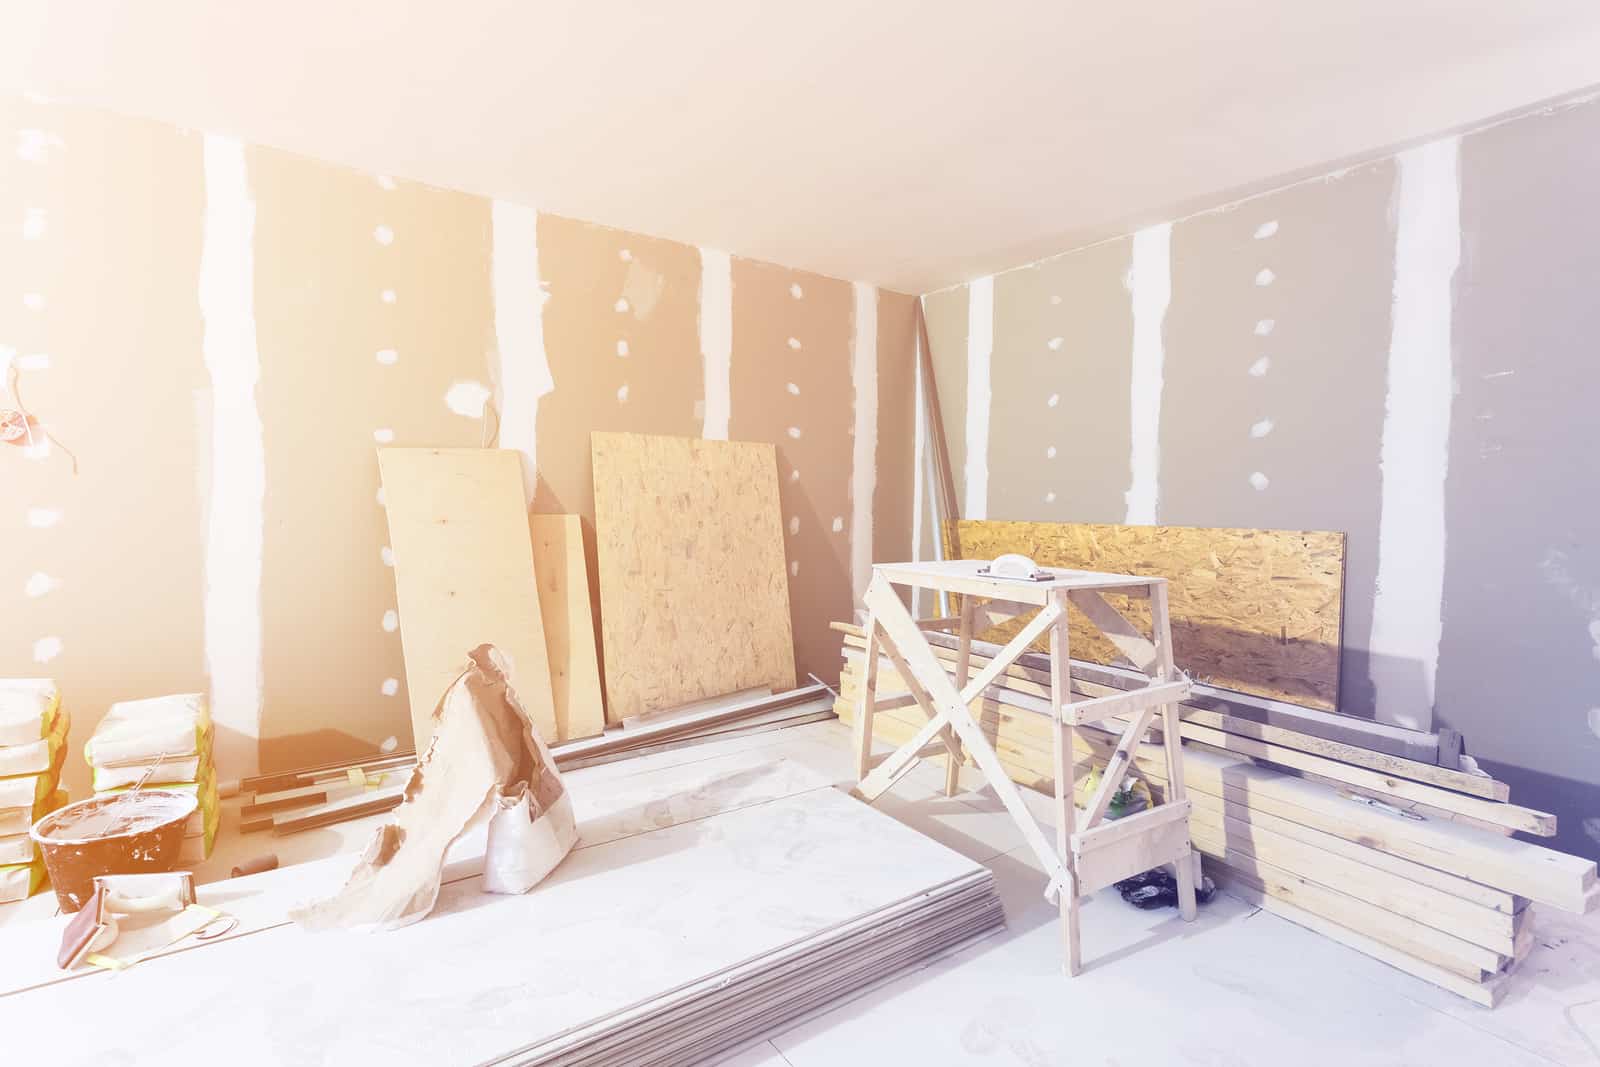 What to look for when buying a home to renovate